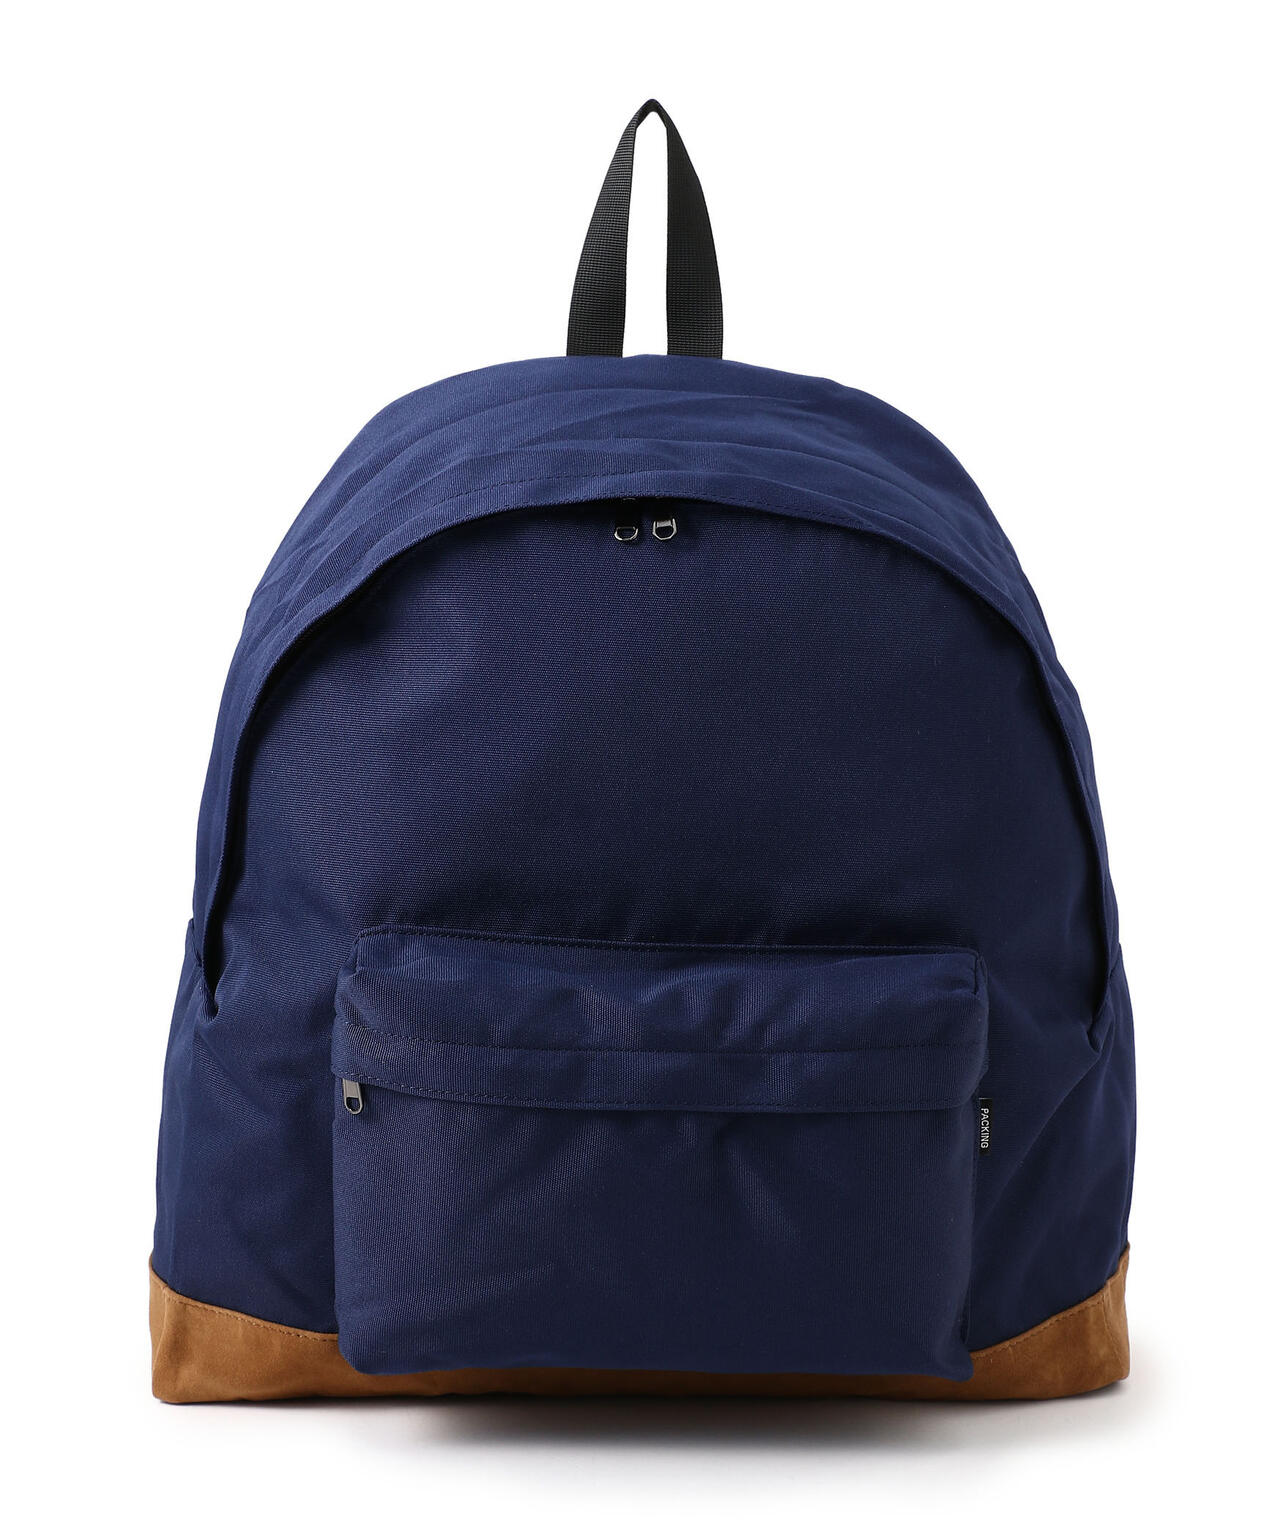 PACKING/パッキング　BOTTOM SUEDE BACKPACK PA-009 ボトムスエードバックパック　リュック